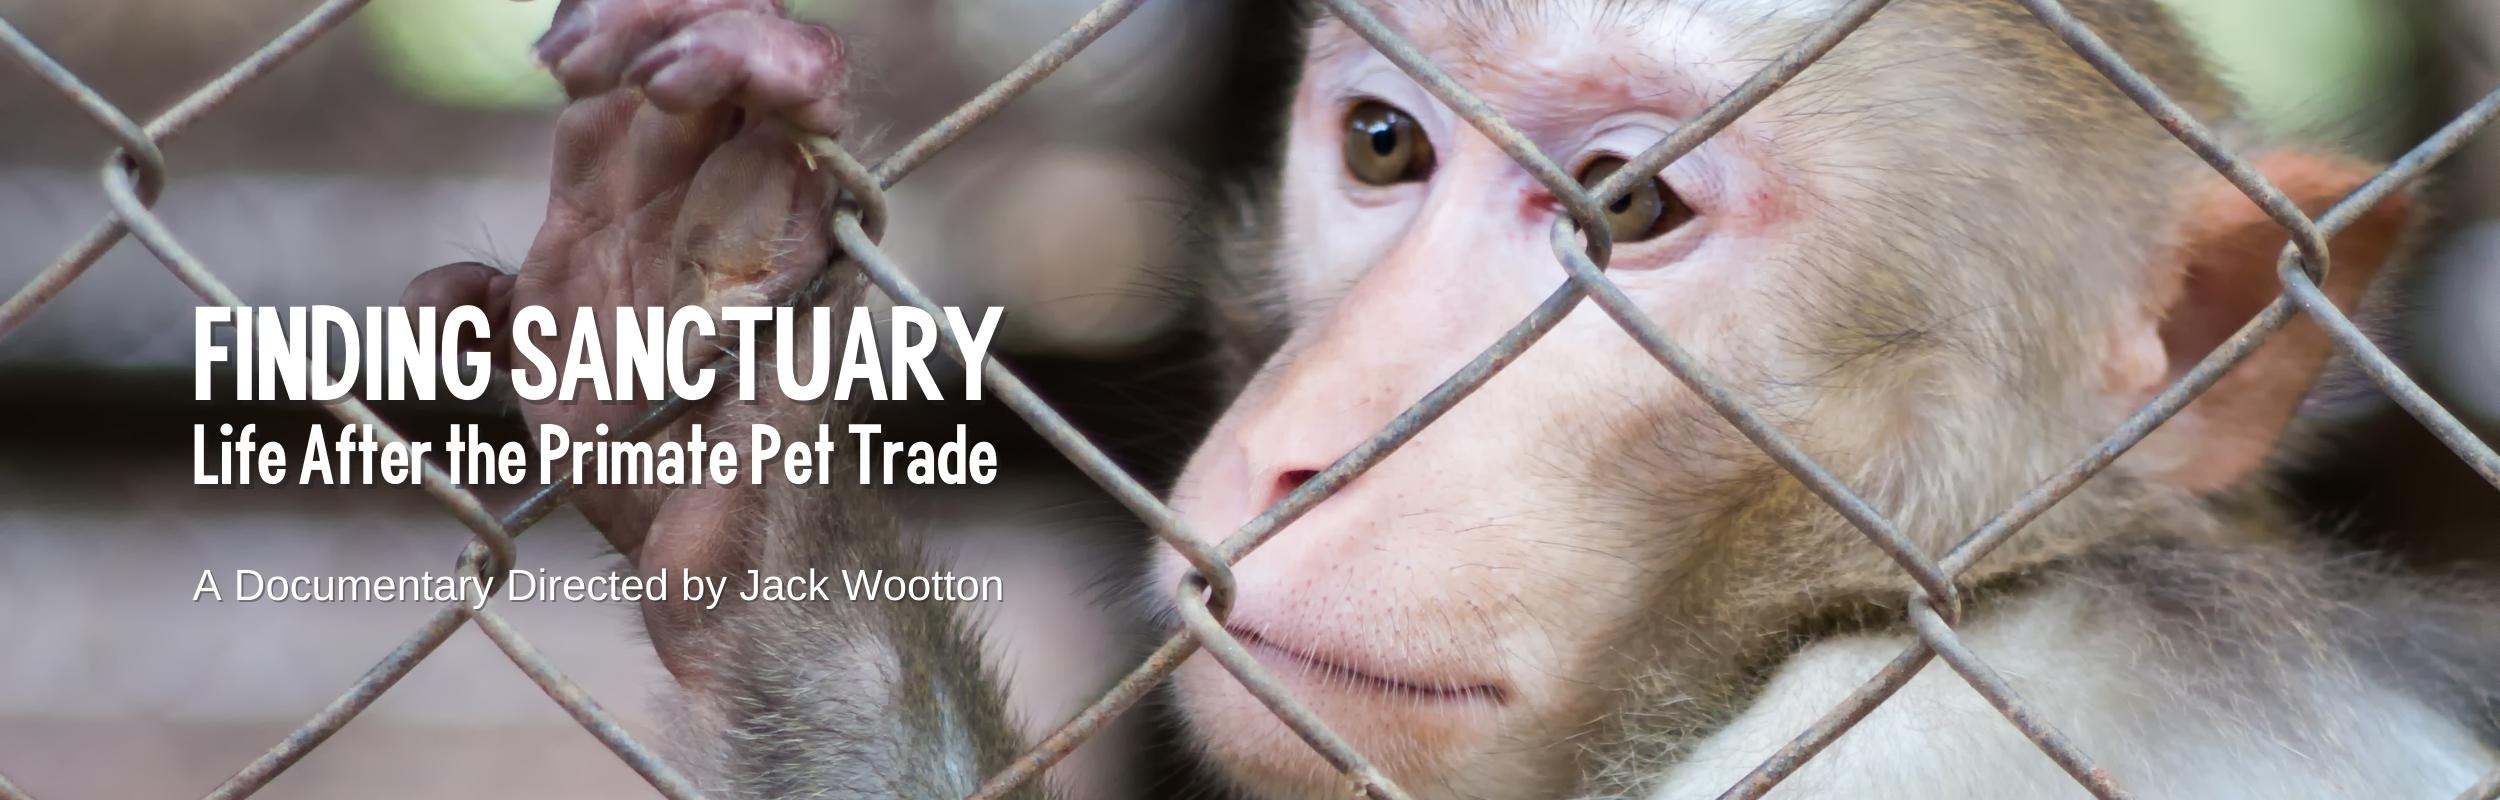 Finding Sanctuary: Life after the Primate Pet Trade, a Documentary Directed by Jack Wootton